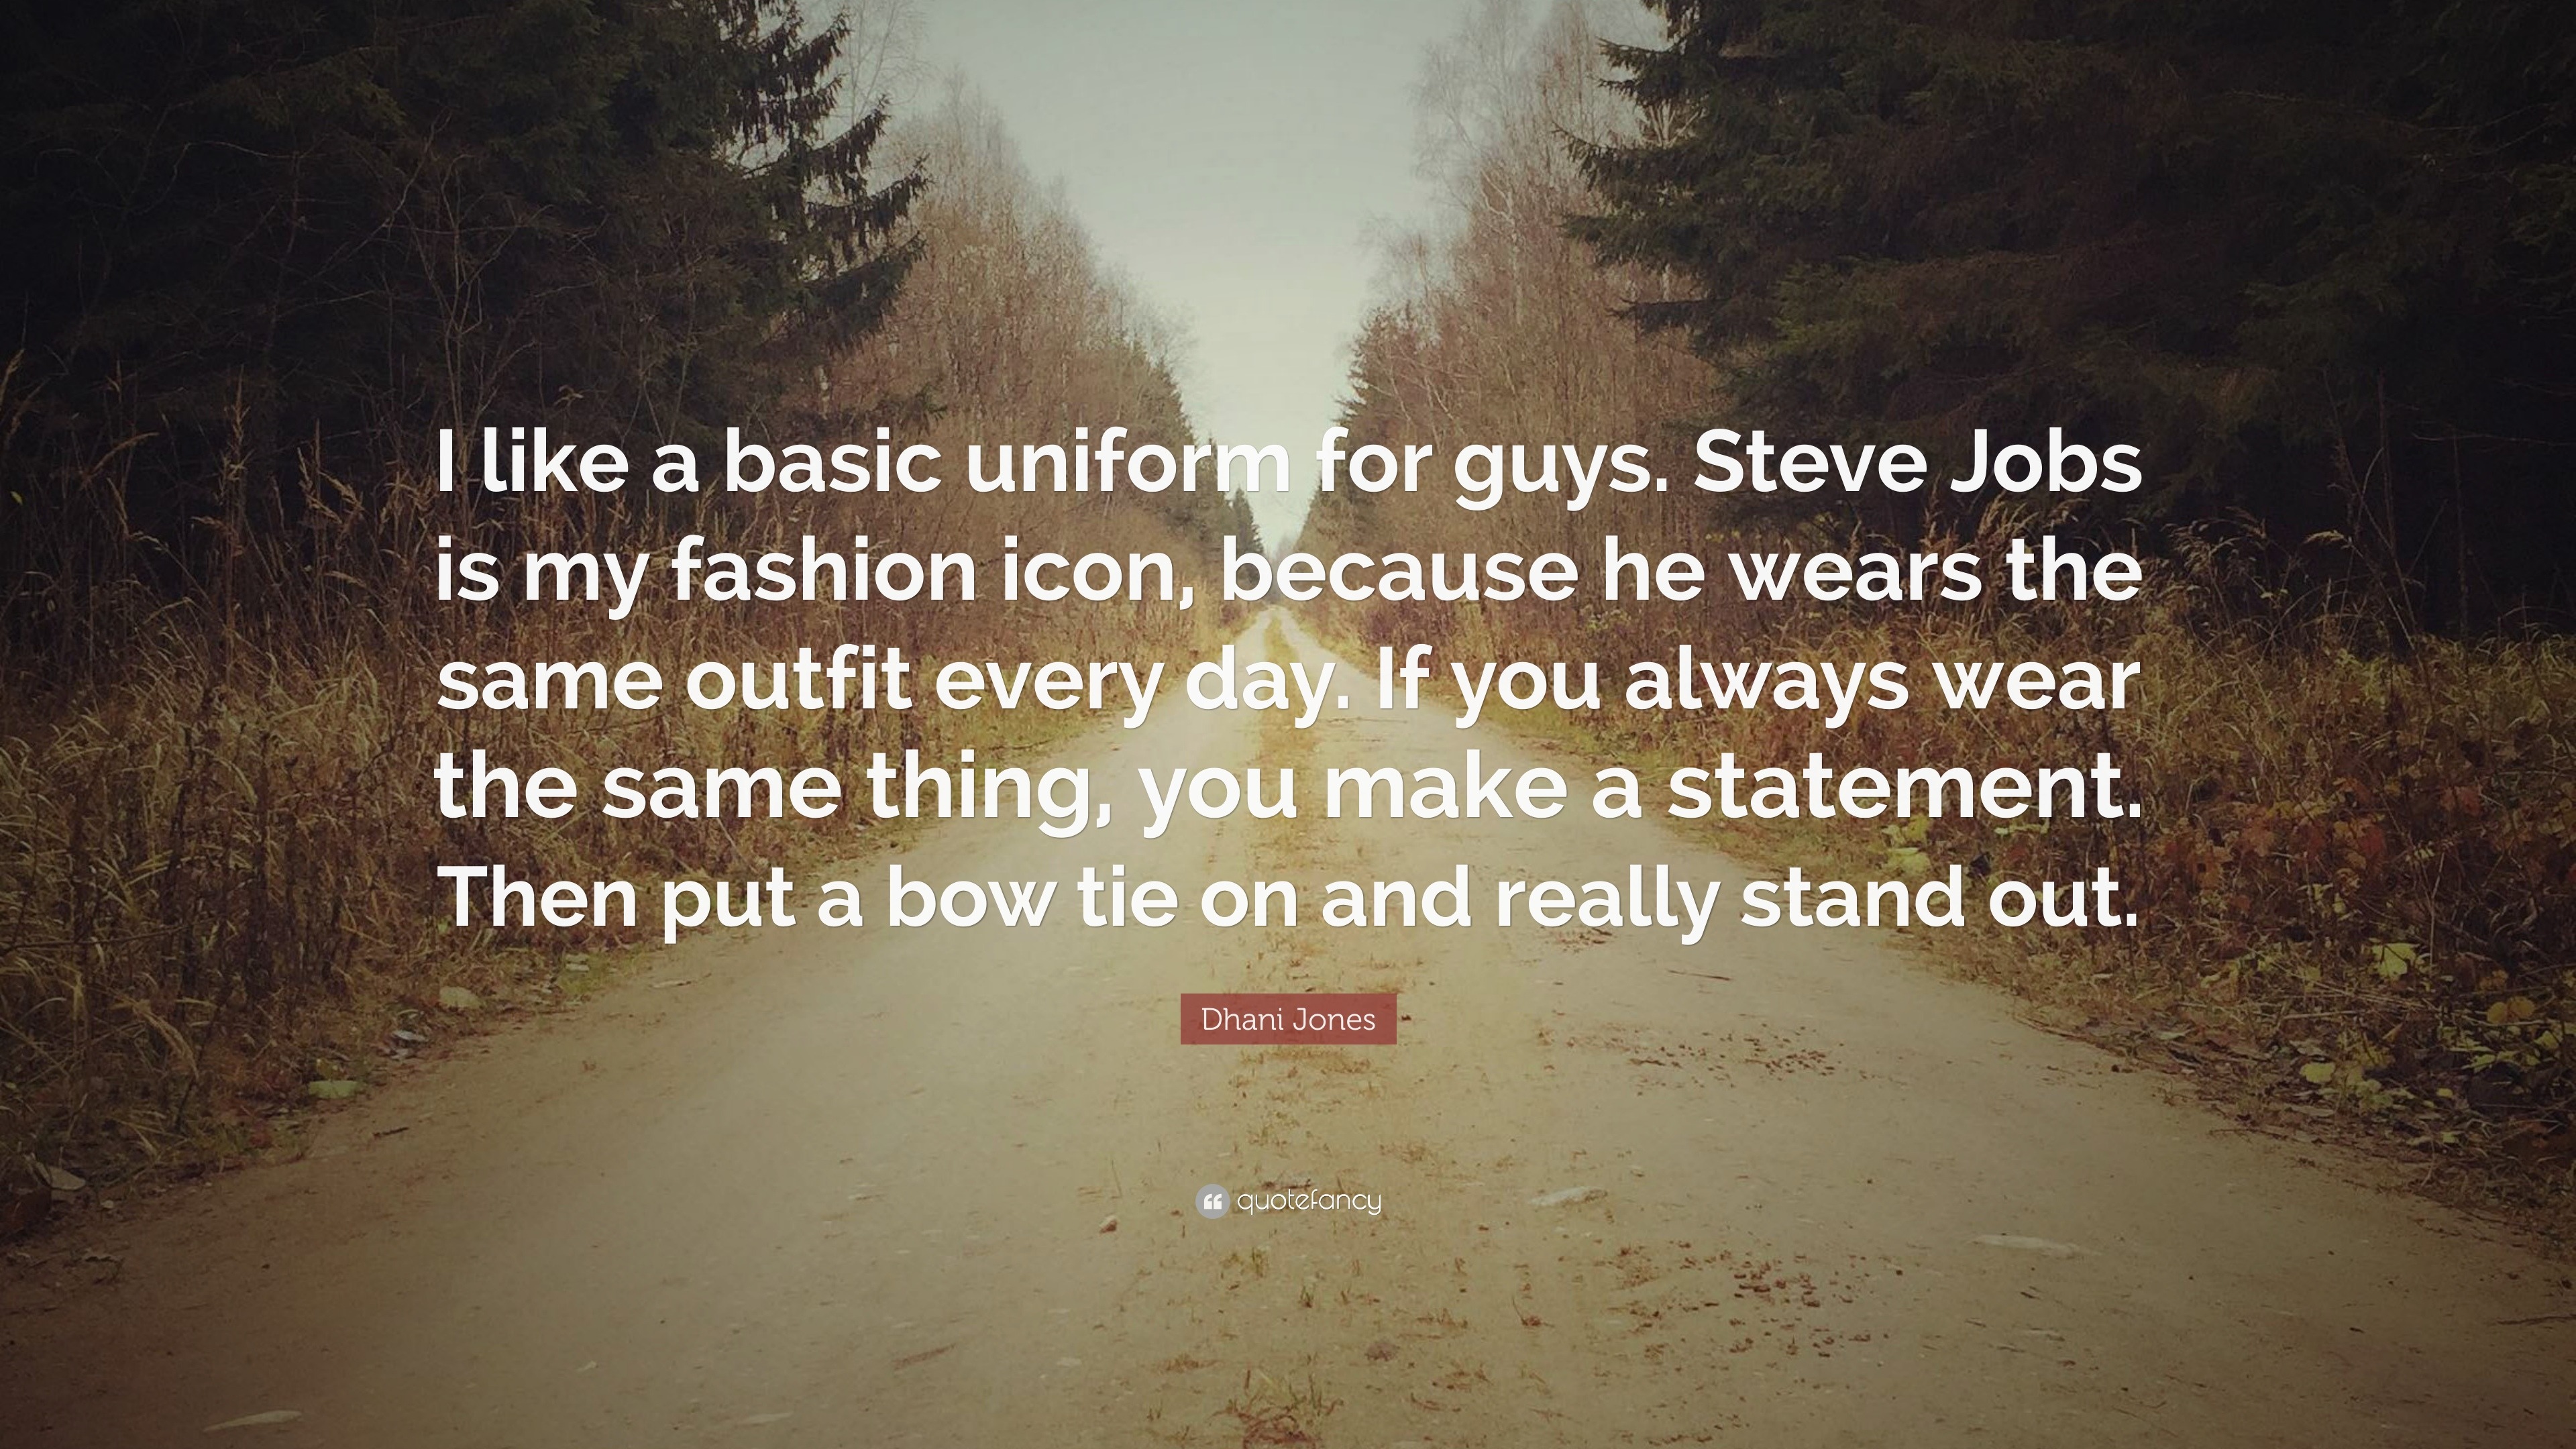 Dhani Jones Quote: “I like a basic uniform for guys. Steve Jobs is my  fashion icon, because he wears the same outfit every day. If you alway...”